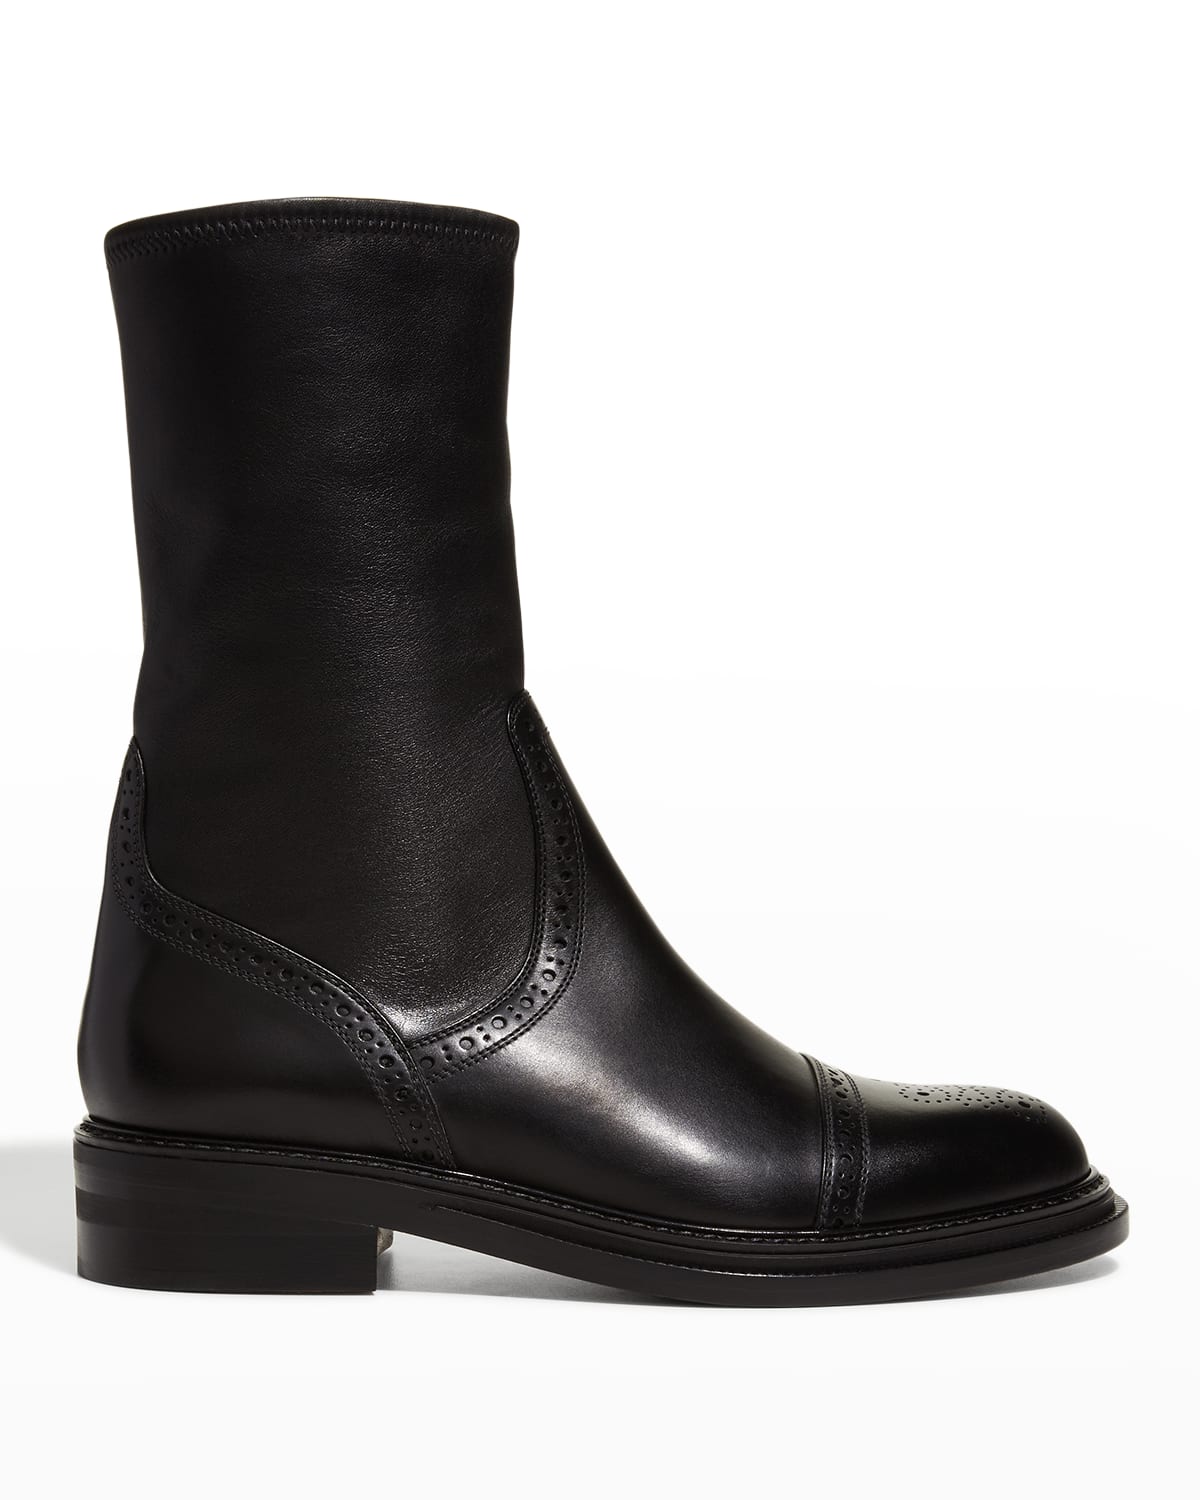 Anagram Perforated Leather Loafer Boots